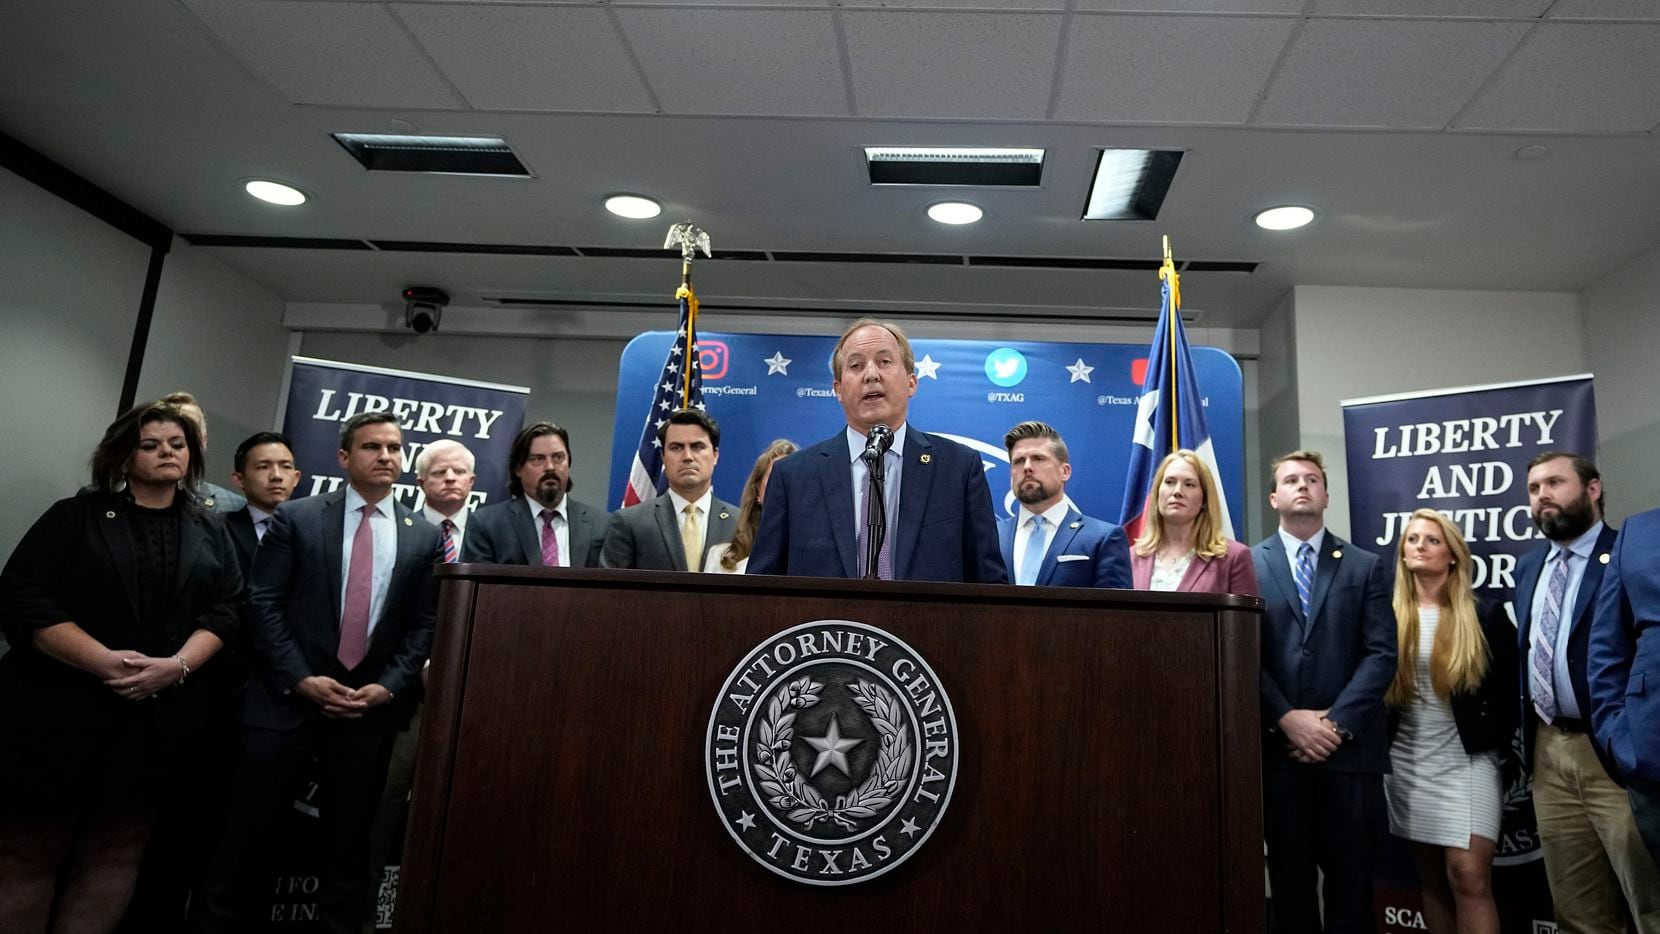 Texas state Attorney General Ken Paxton, center, flanked by his staff, makes a statement at...